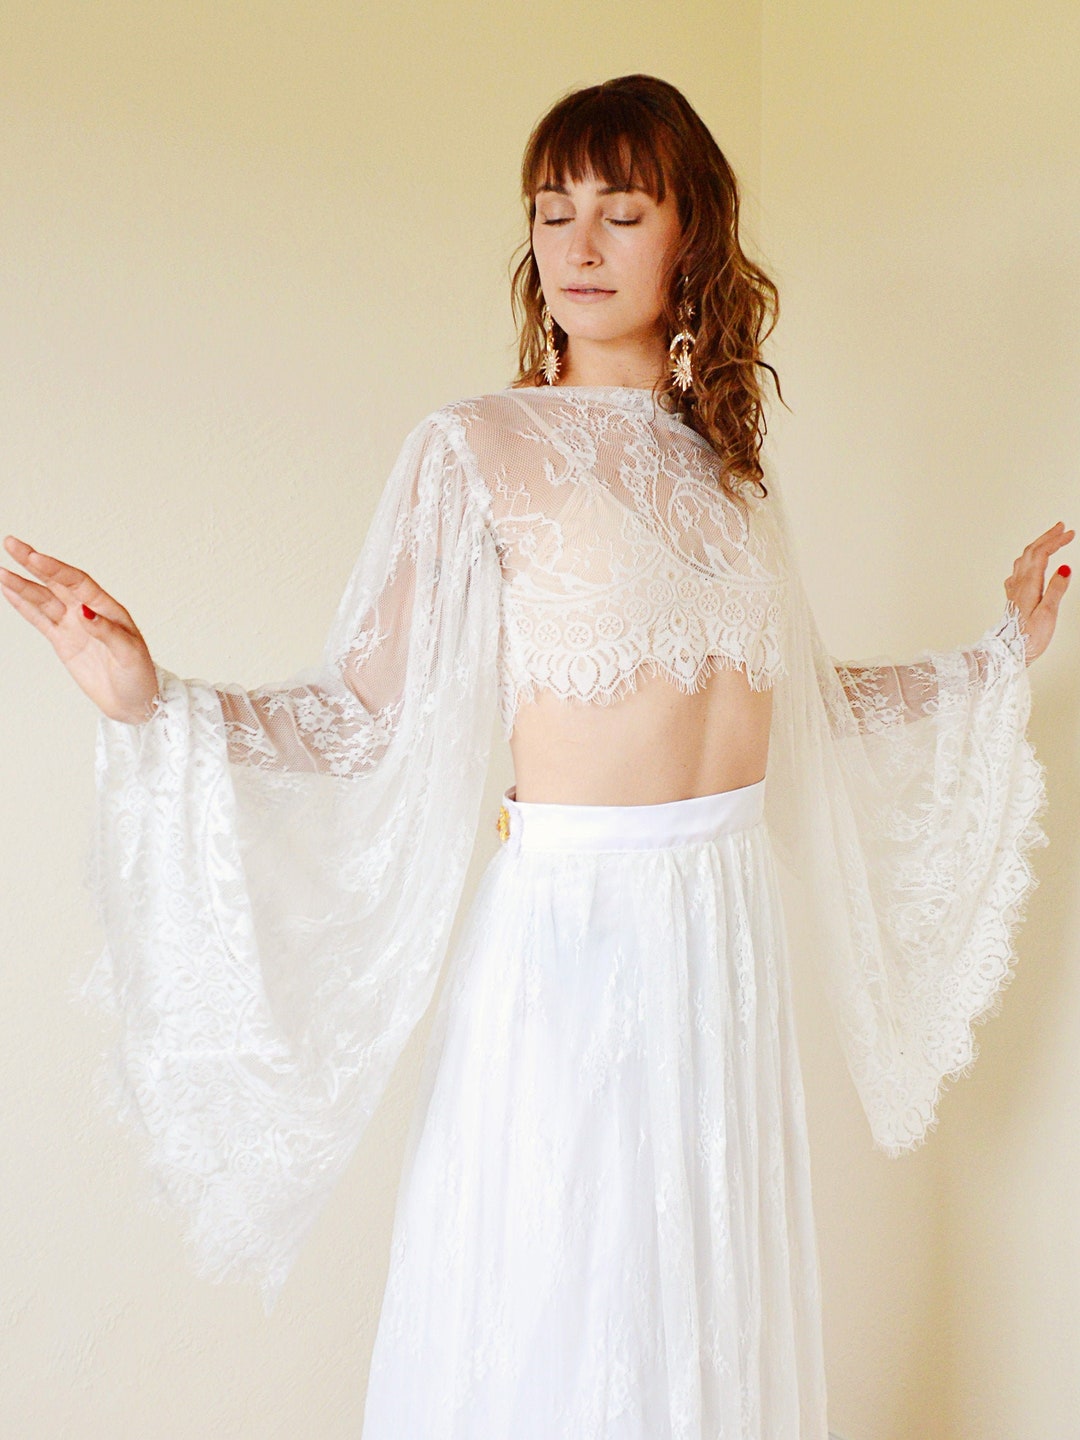 Lace Bell Sleeve Top, Chantilly Lace Bridal Coverup, Angel Wing Blouse,  Black or White Eyelash Wedding Midriff Crop Top, Sheer Long Sleeve 